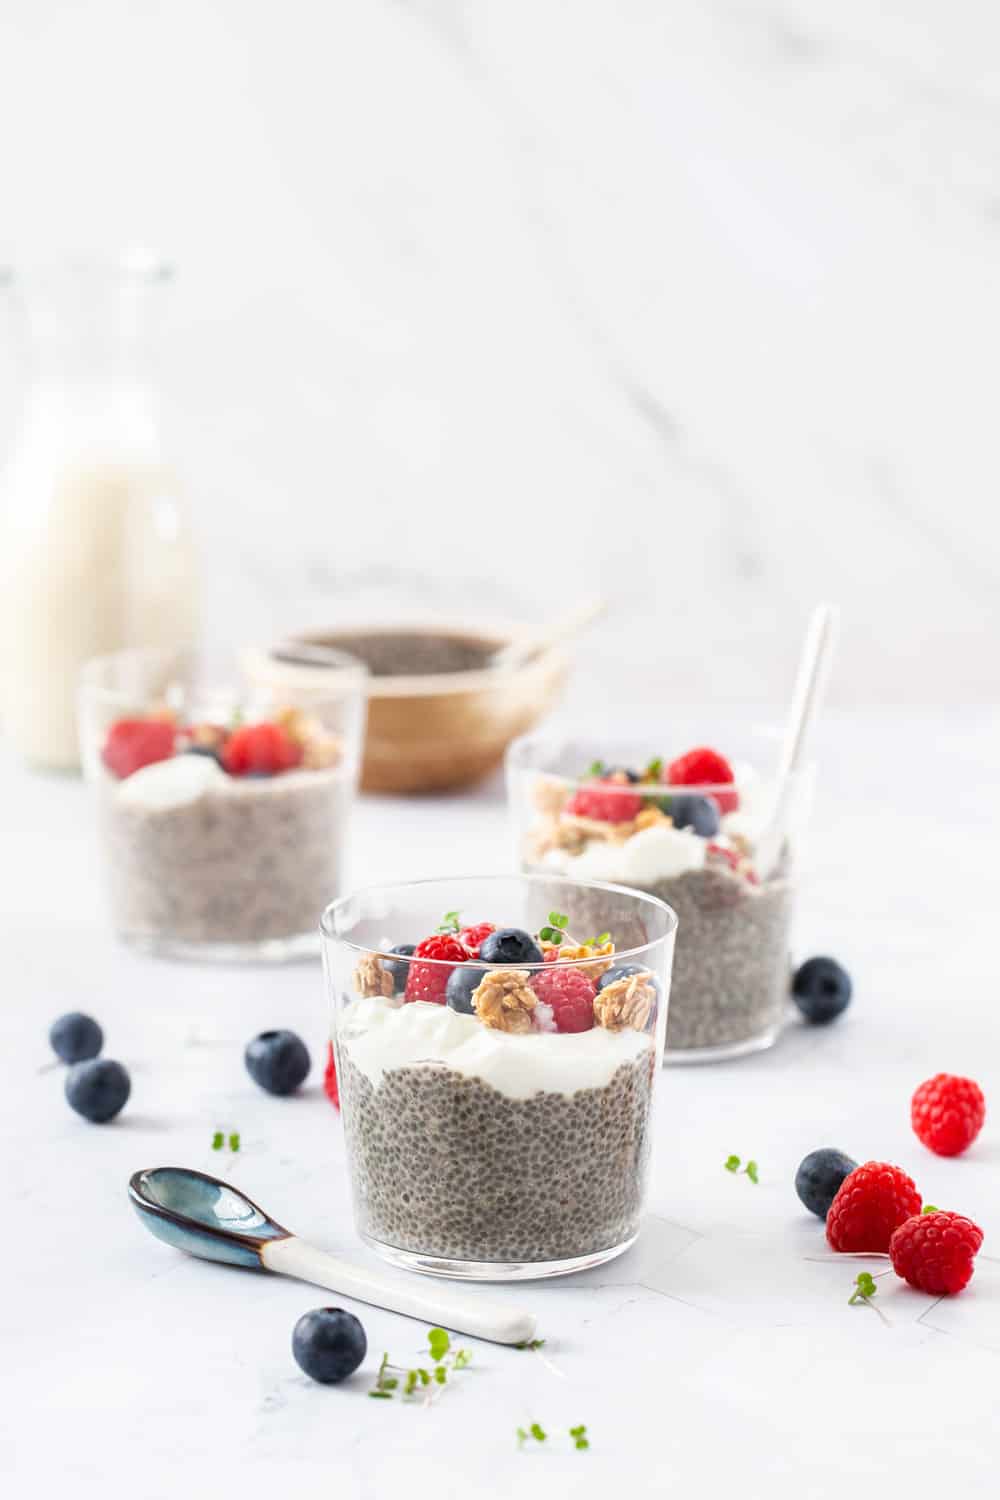 3 chia puddings in glasses topped with berries and granola.